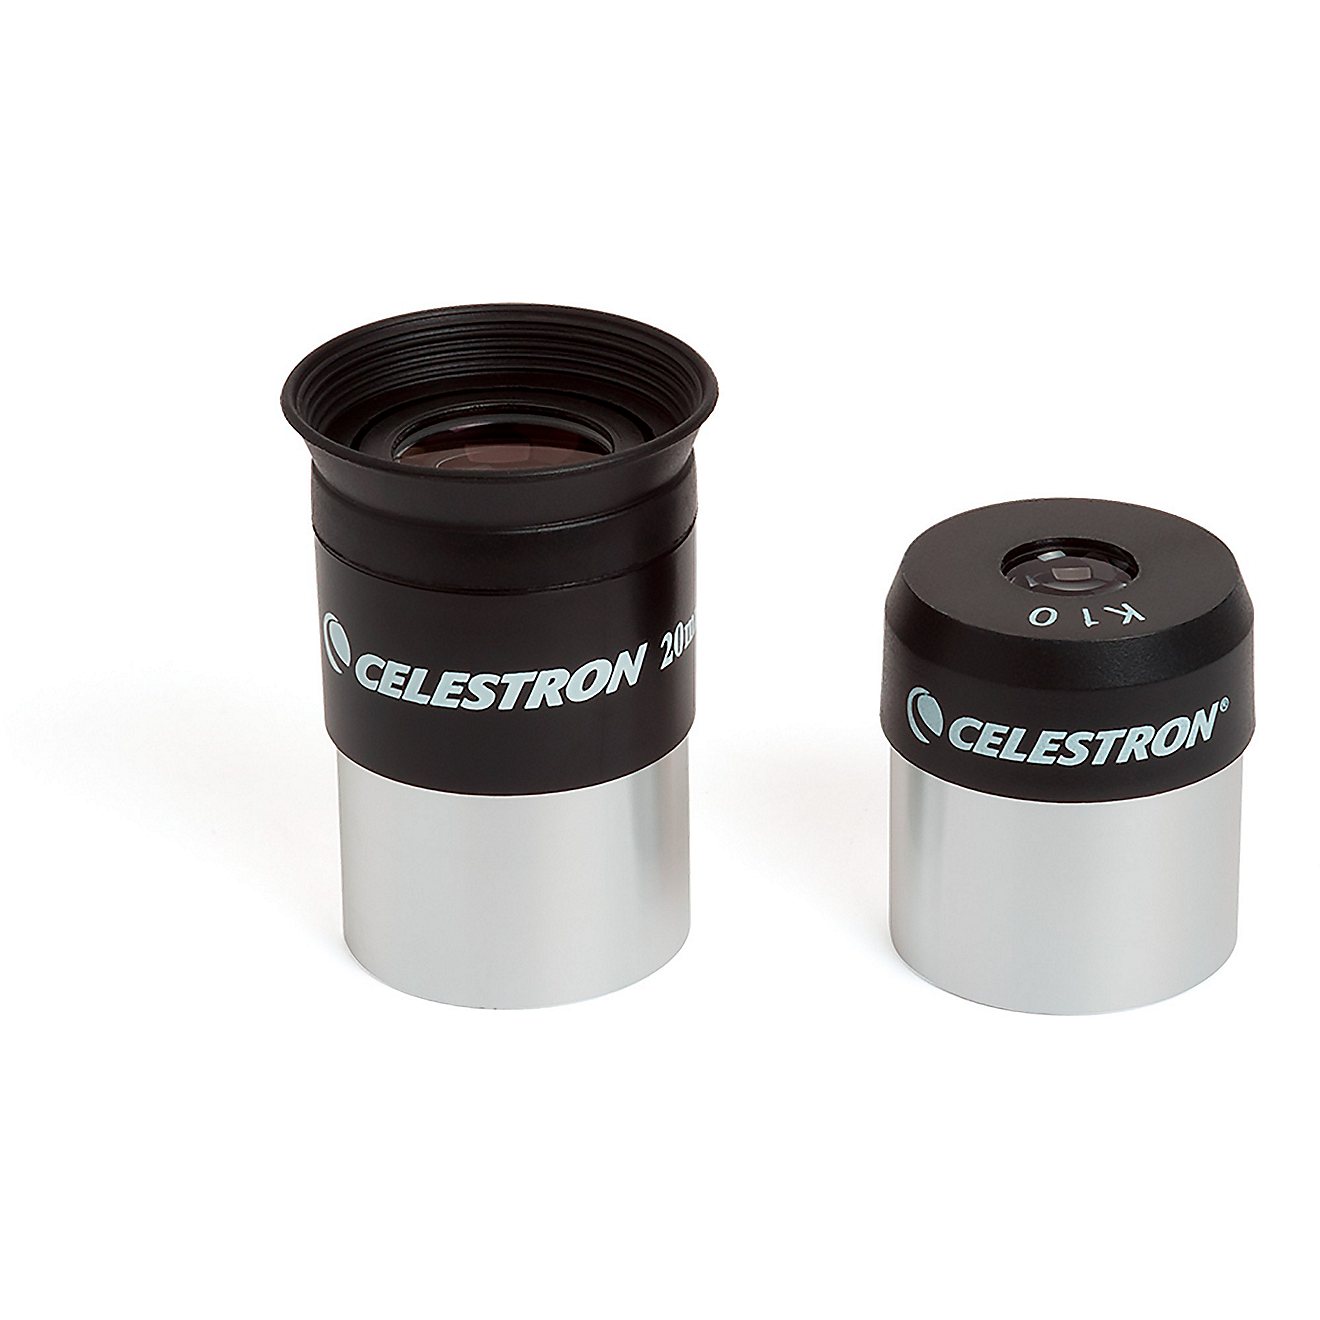 Celestron National Park Foundation FirstScope Telescope                                                                          - view number 5